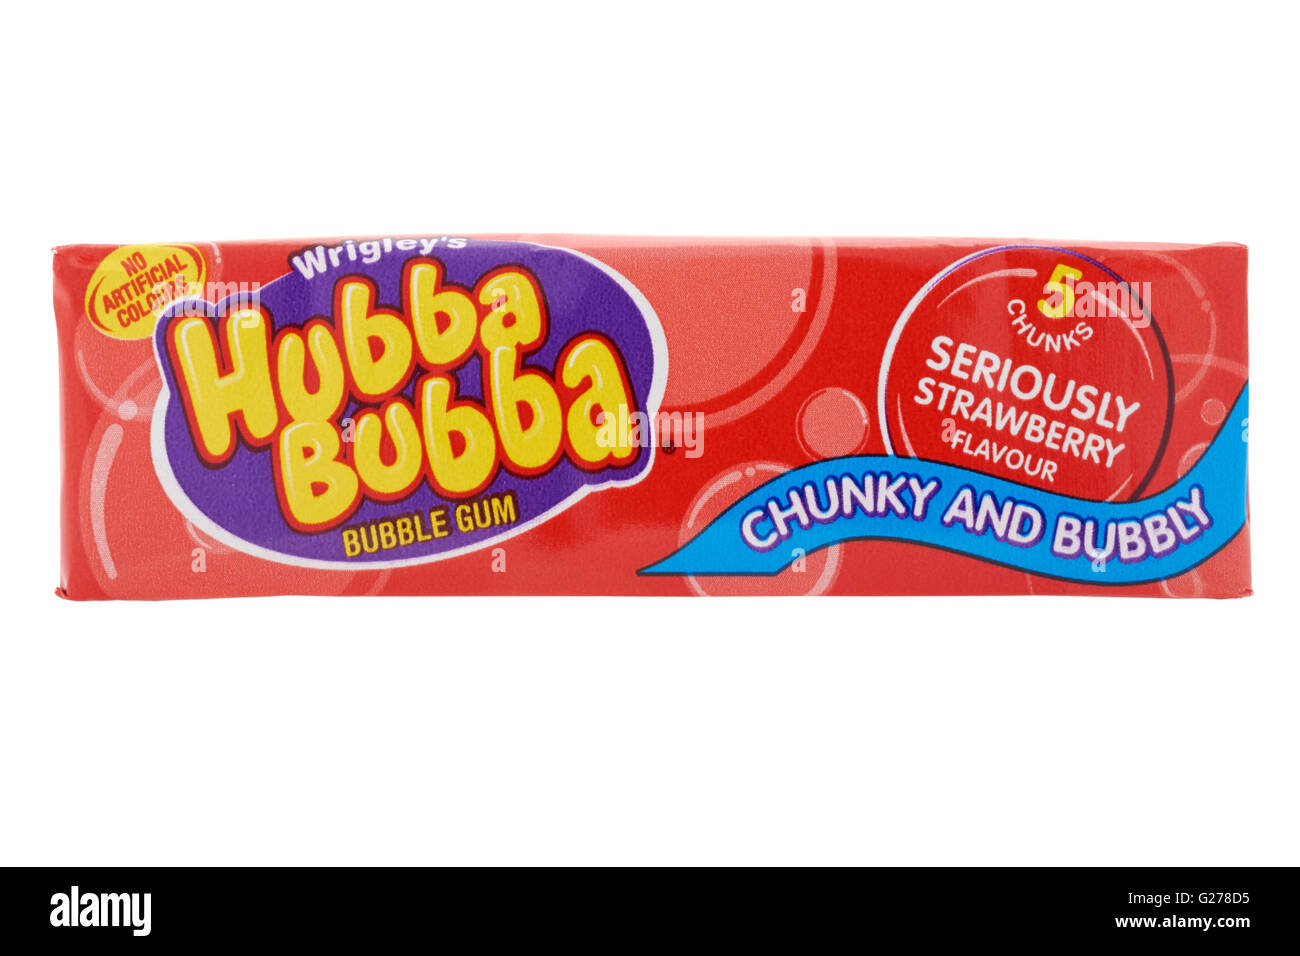 Packet of Hubba Bubba bubble gum on white background Stock Photo